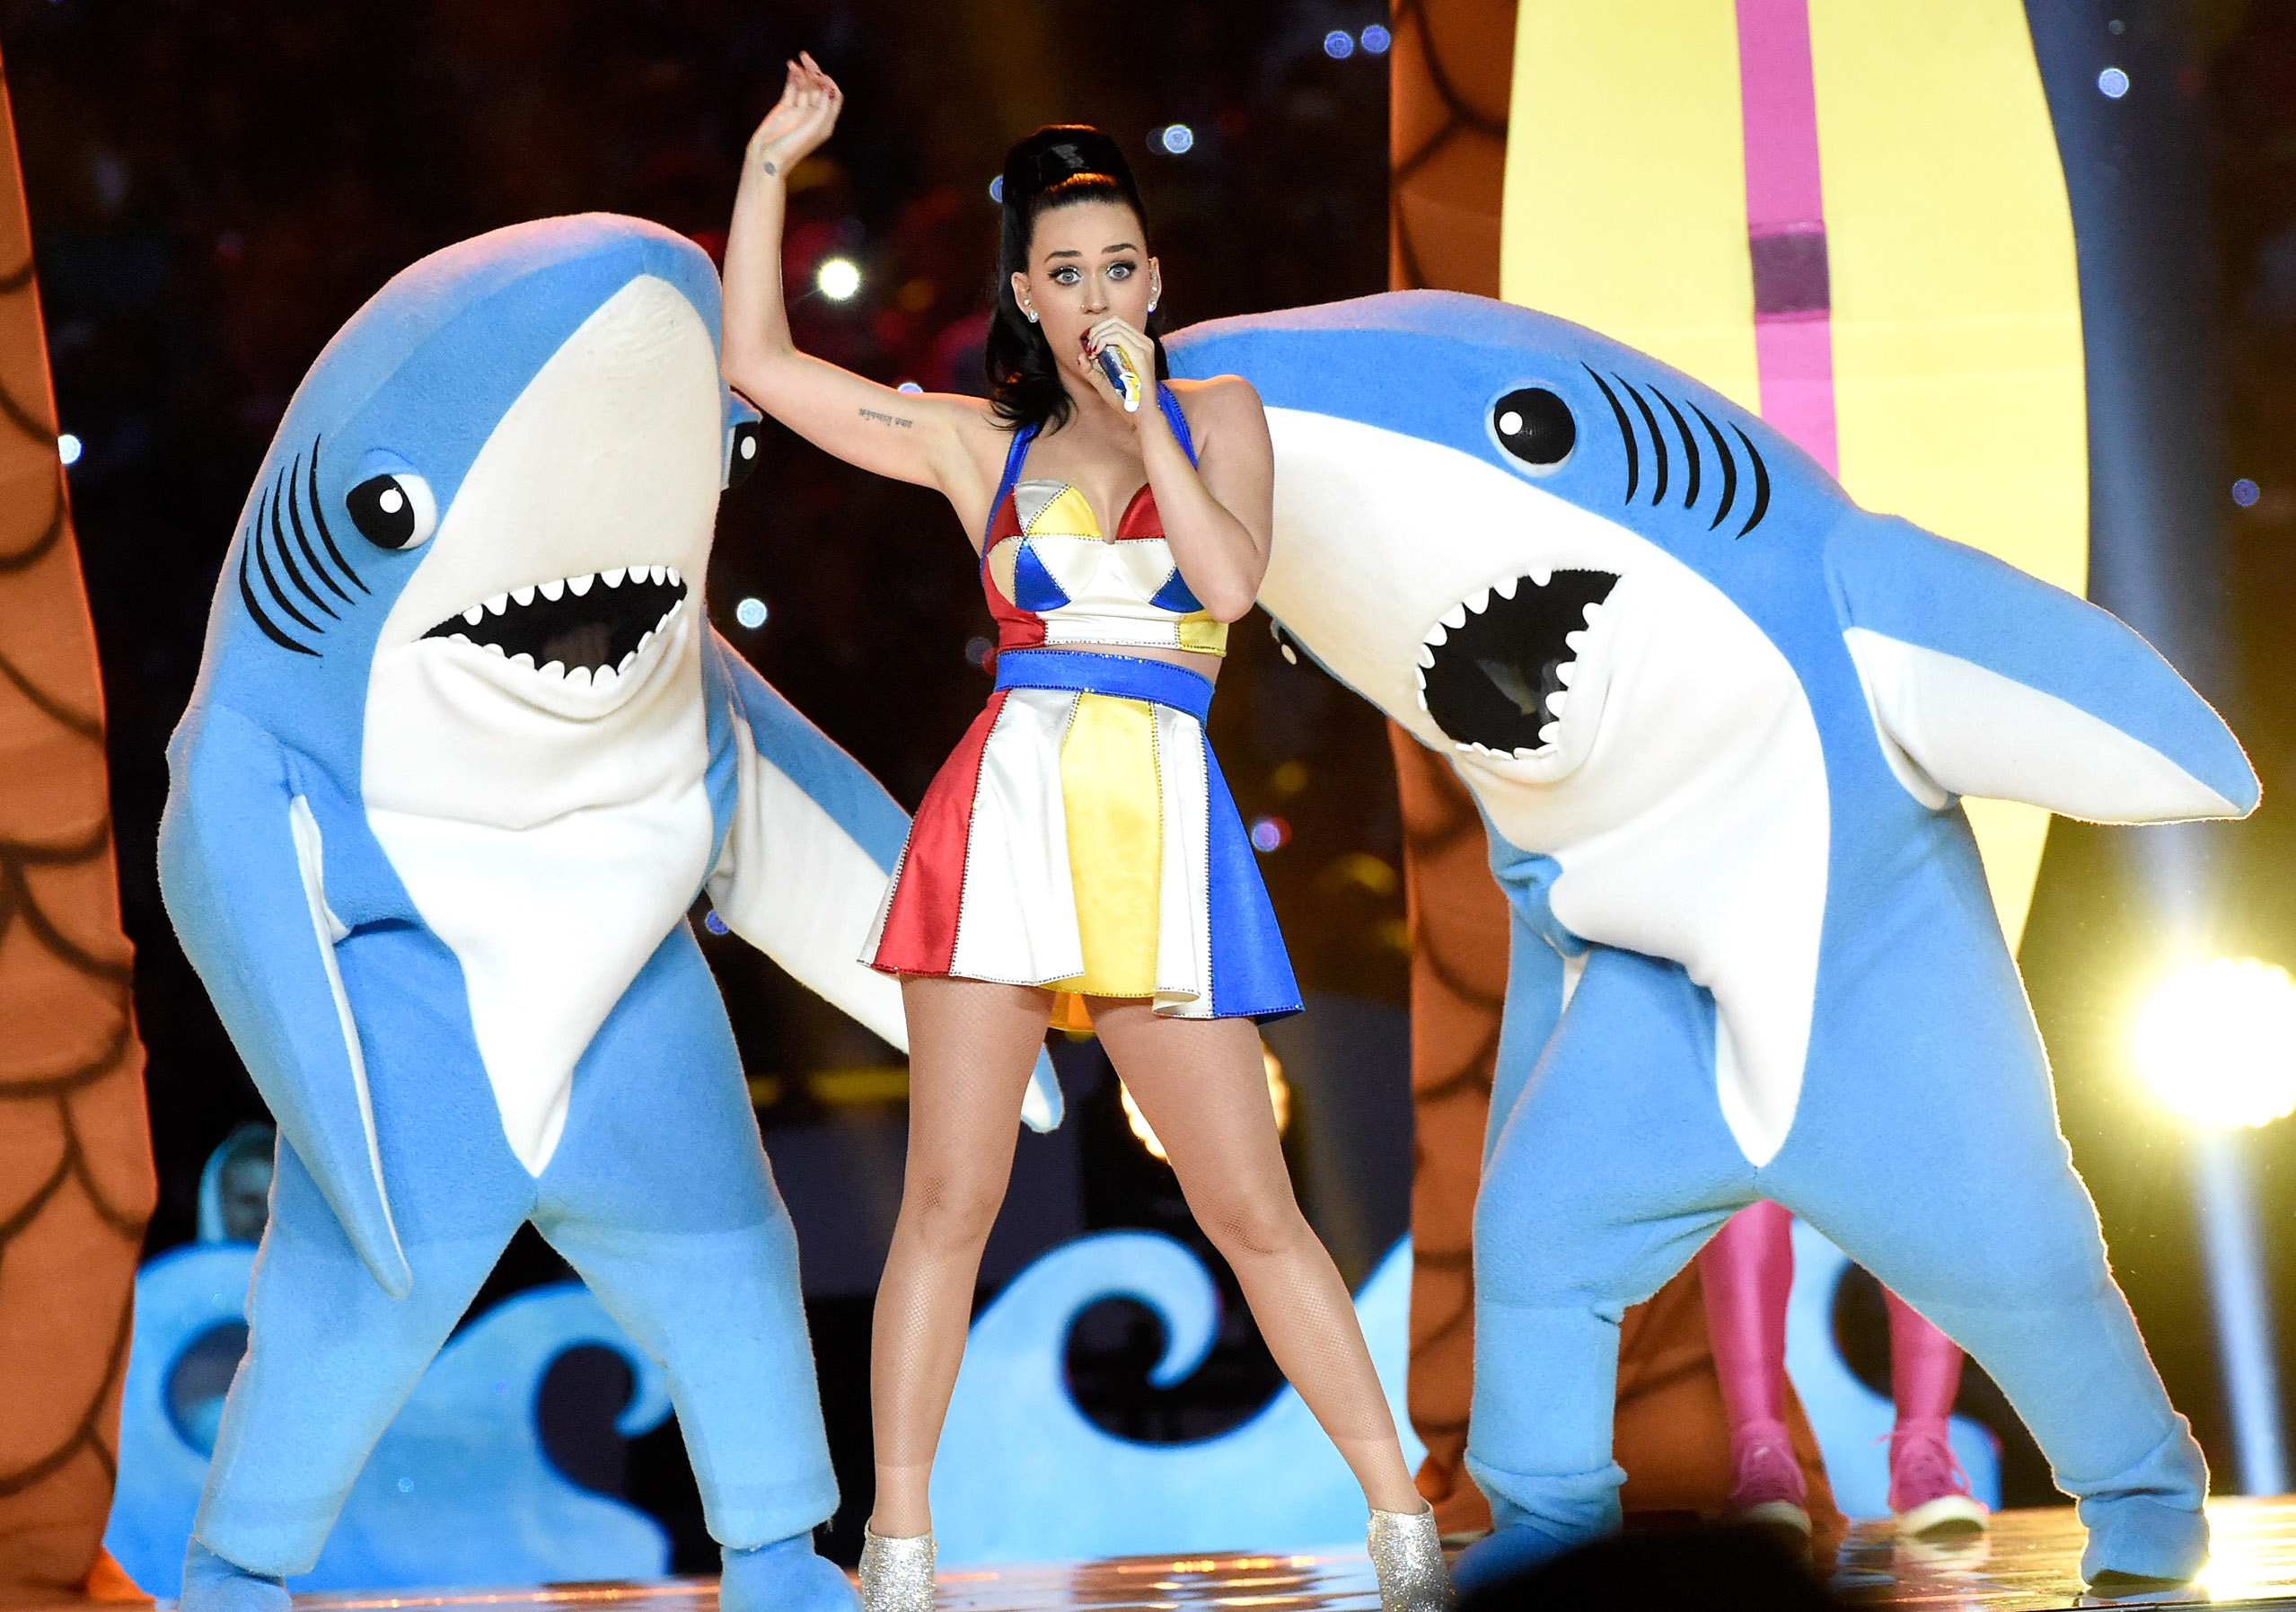 Katy Perry performs during Super Bowl XLIX on Feb. 1, 2015 in Glendale, Ariz.